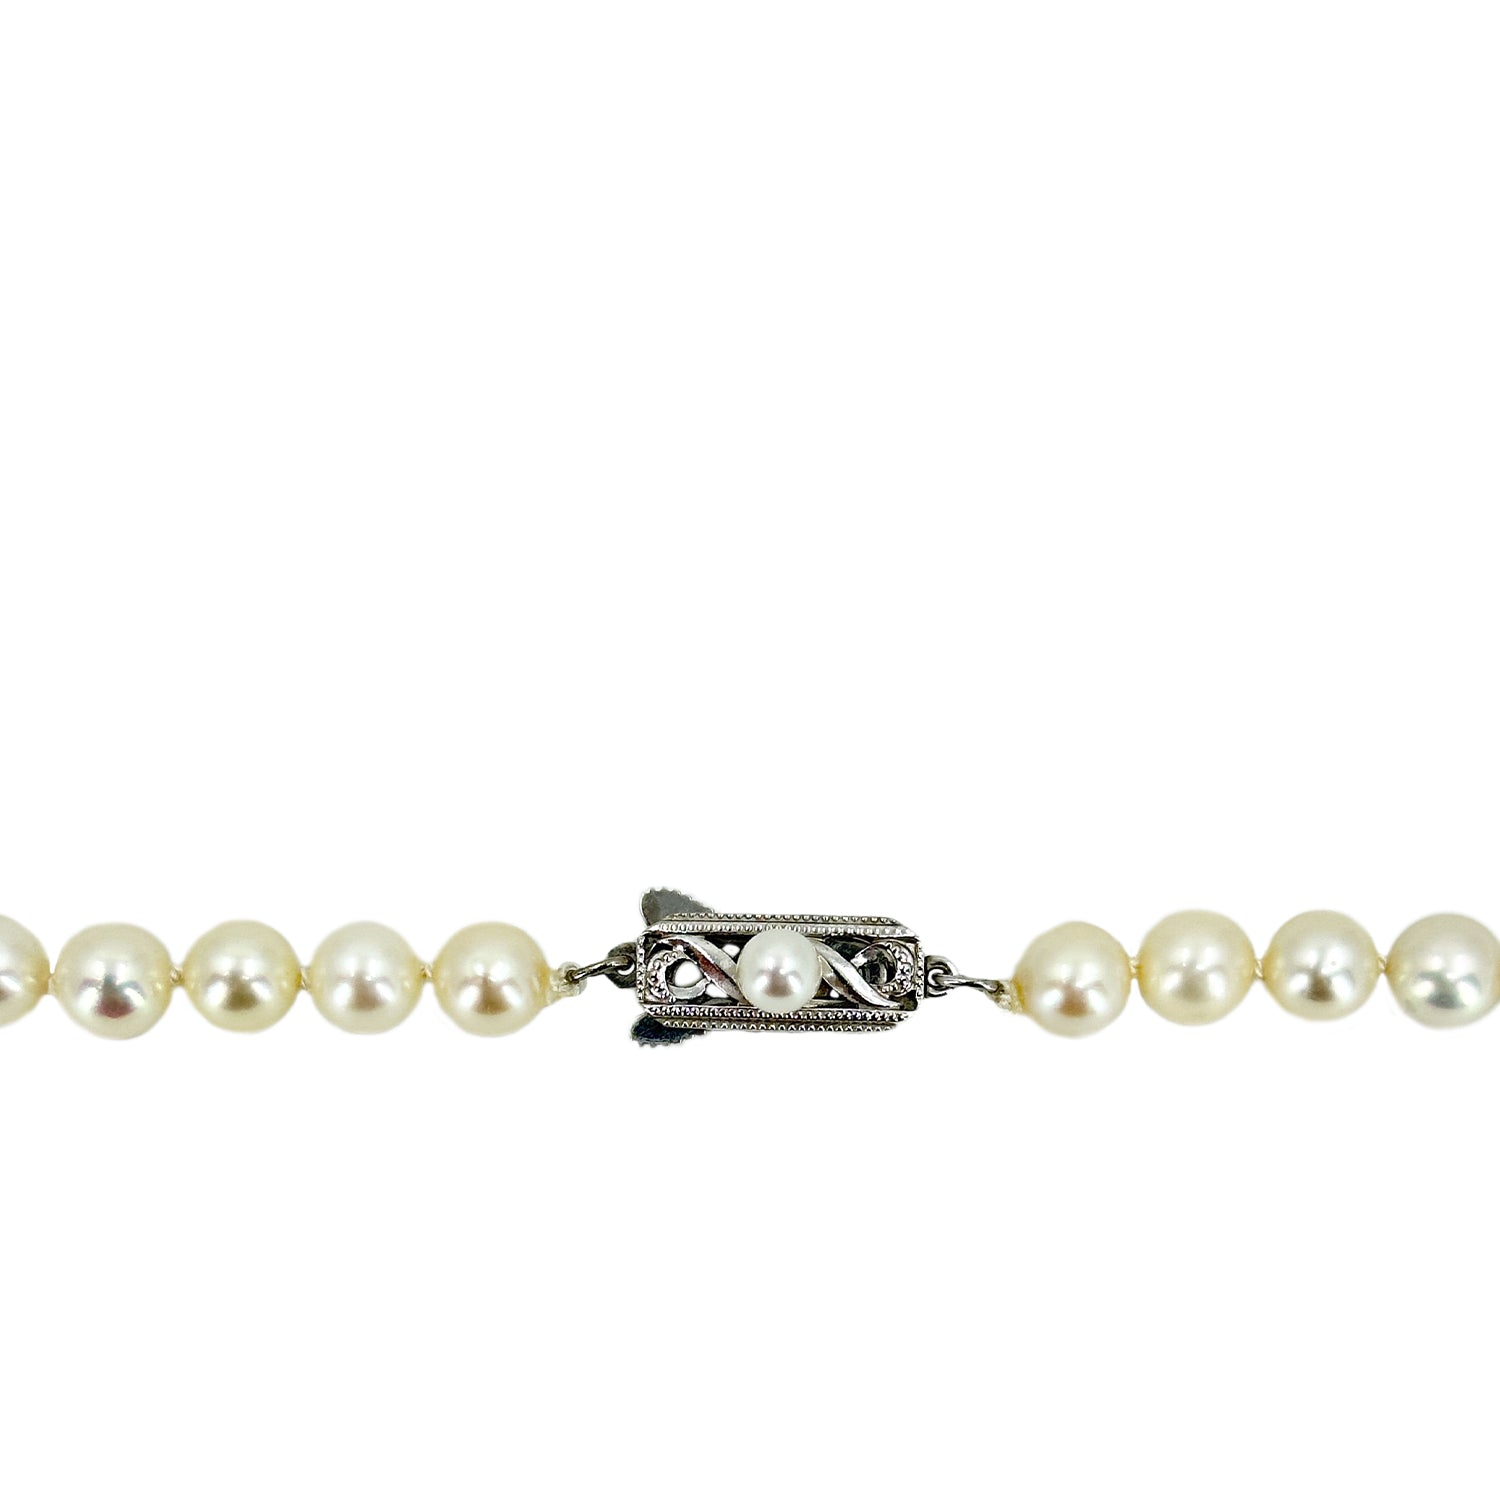 Large Mikimoto Japanese Cultured Akoya Pearl Vintage Strand Necklace- 14K White Gold 22 Inch